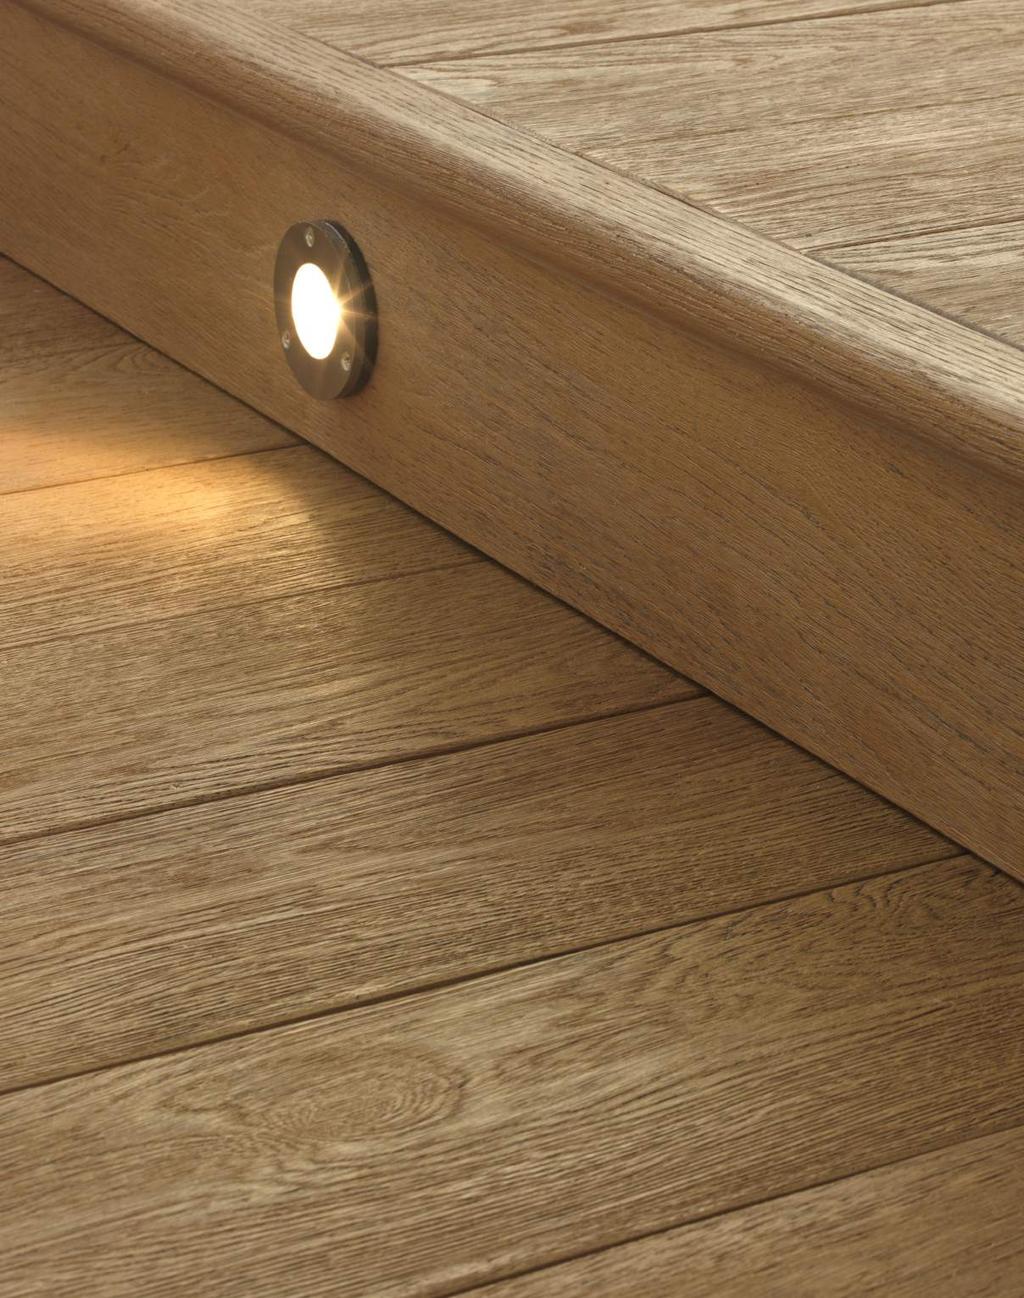 PRODUCT WASTAGE The Millboard manufacturing process creates minimal wastage because boards are moulded to specific sizes and any wastage can be recycled.